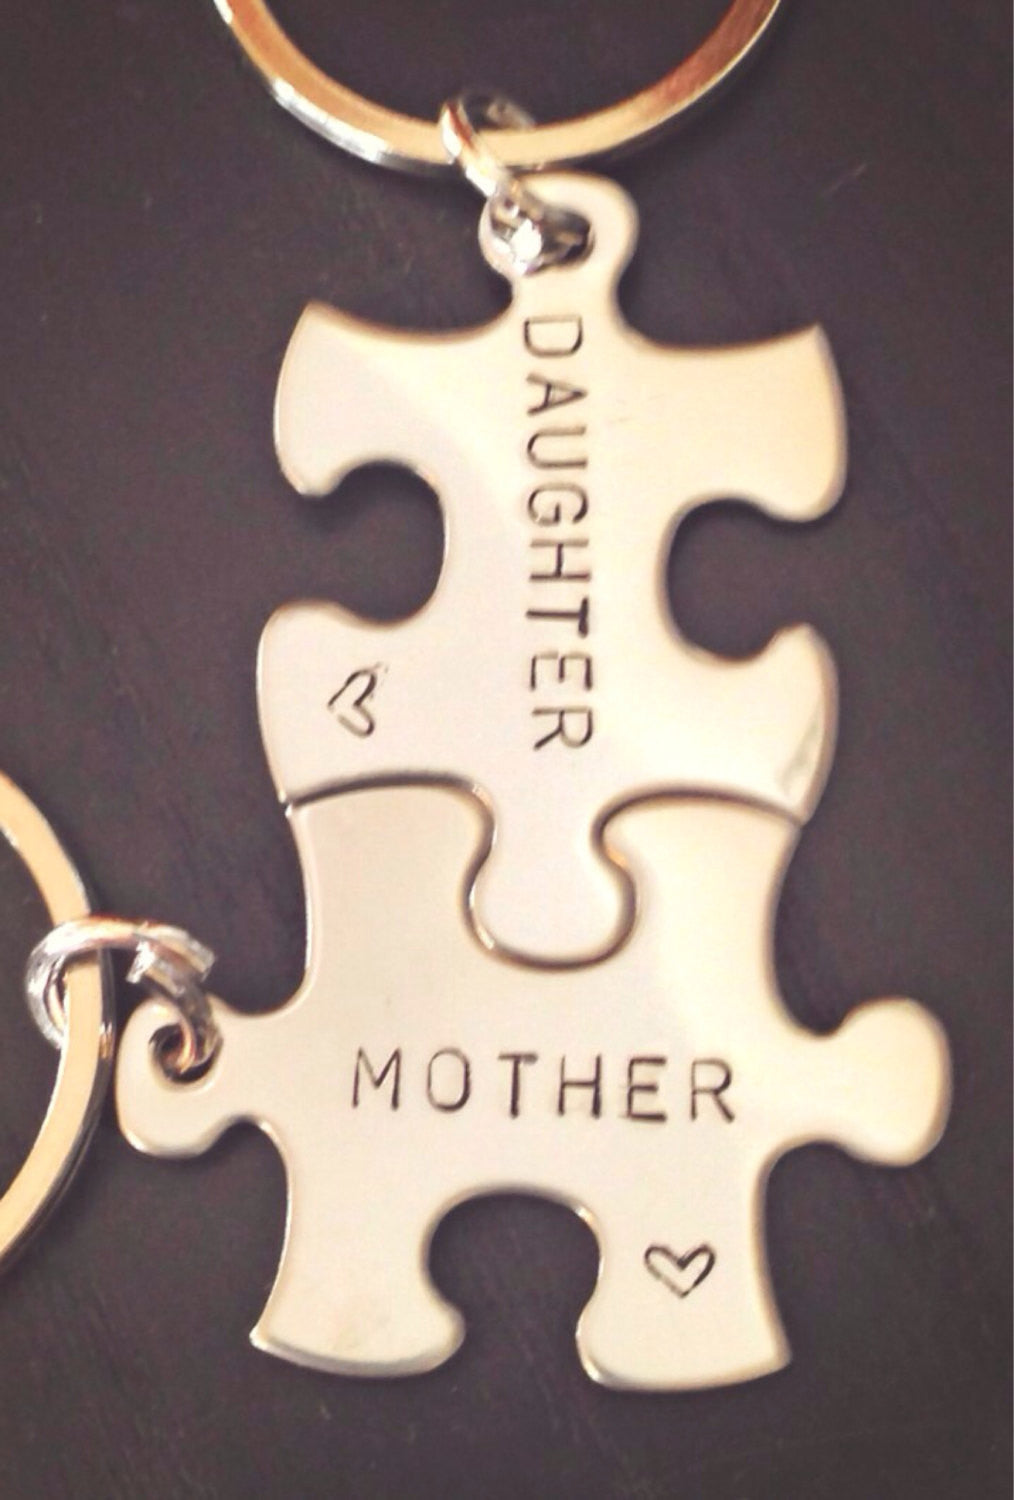 Mother Daughter Gifts-, Mother Daughter Keychain-, Mother's Day Gift -, Personalized Keychains-, natashaaloha - Natashaaloha, jewelry, bracelets, necklace, keychains, fishing lures, gifts for men, charms, personalized, 